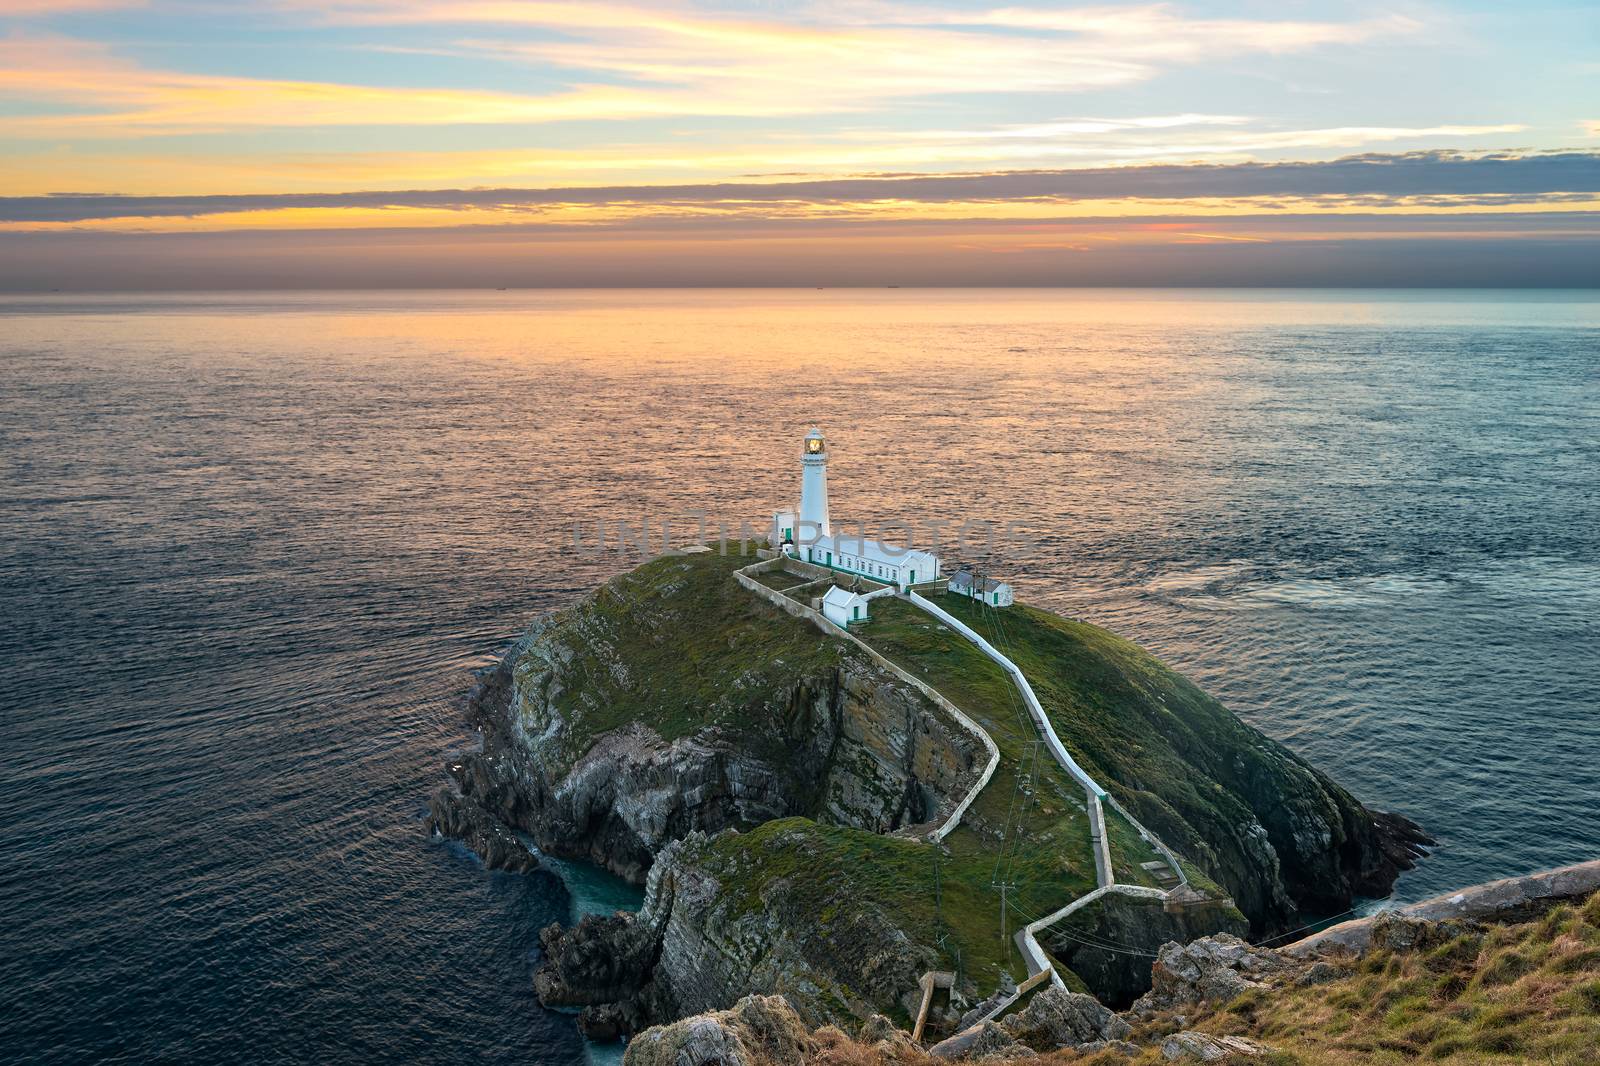 South stack lighthouse on Holy Island in Wales at sunset by Valegorov